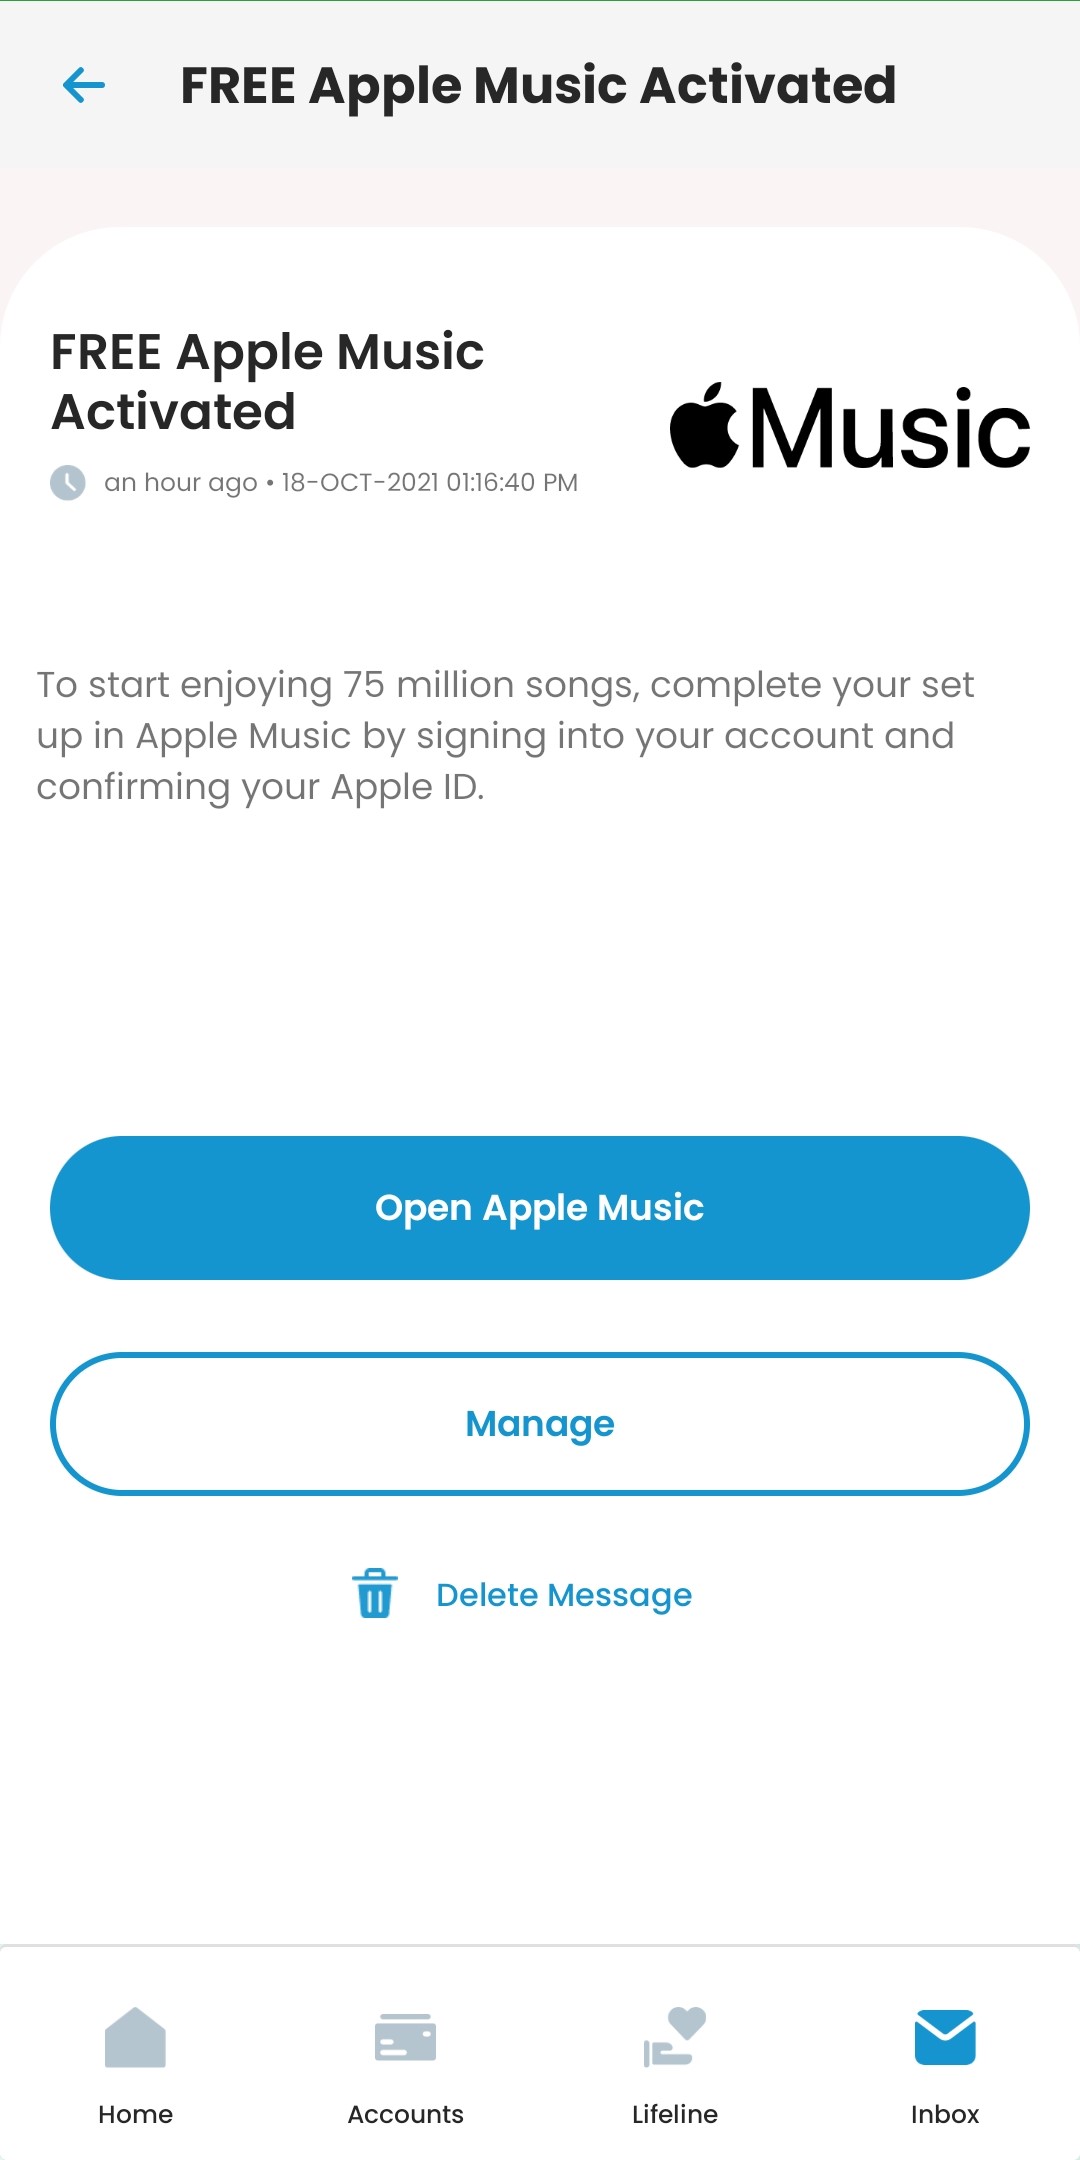 How To Get 6 Months Apple Music For Free in the Philippines